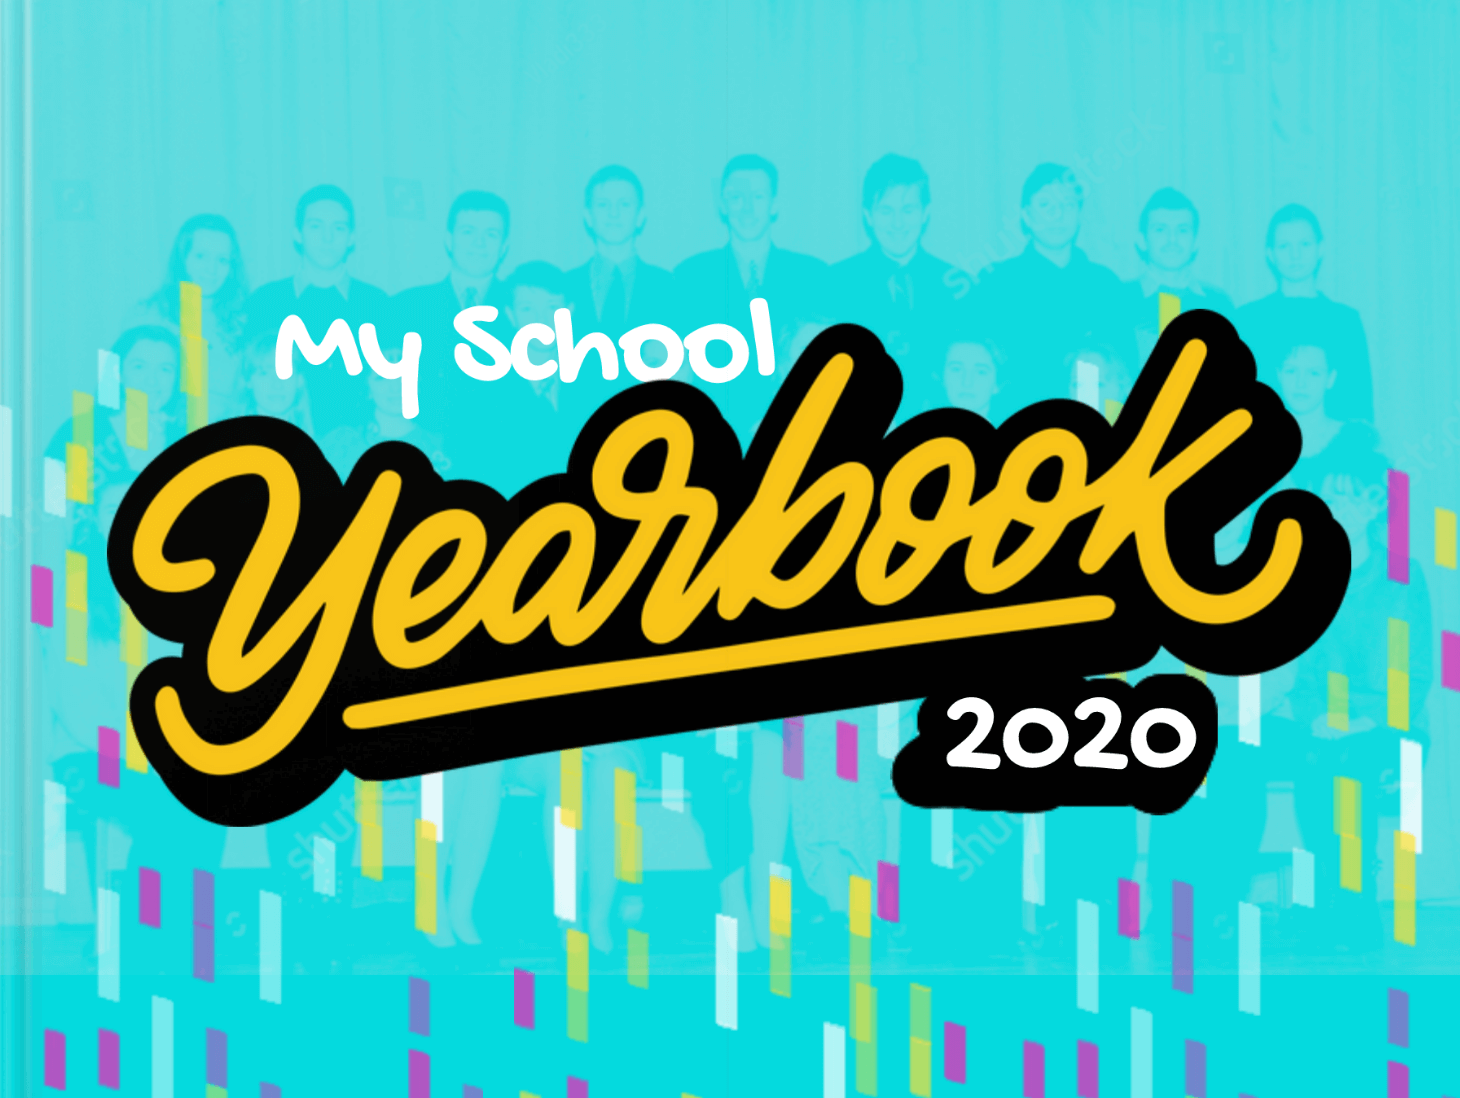 Featured image for “Creating yearbooks with Book Creator”